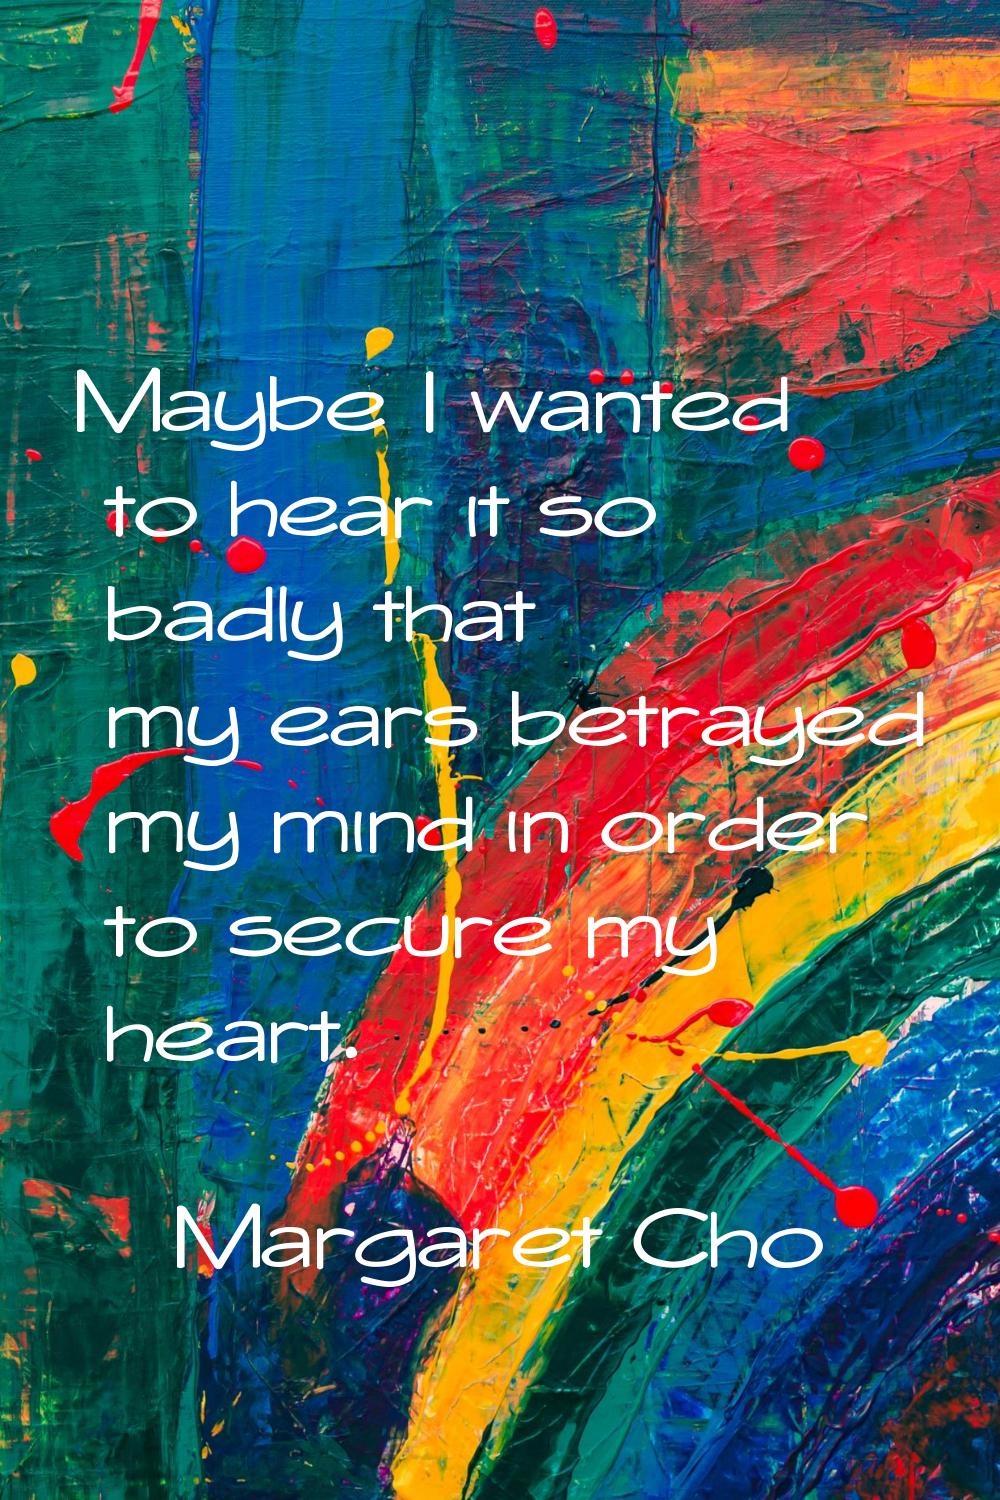 Maybe I wanted to hear it so badly that my ears betrayed my mind in order to secure my heart.